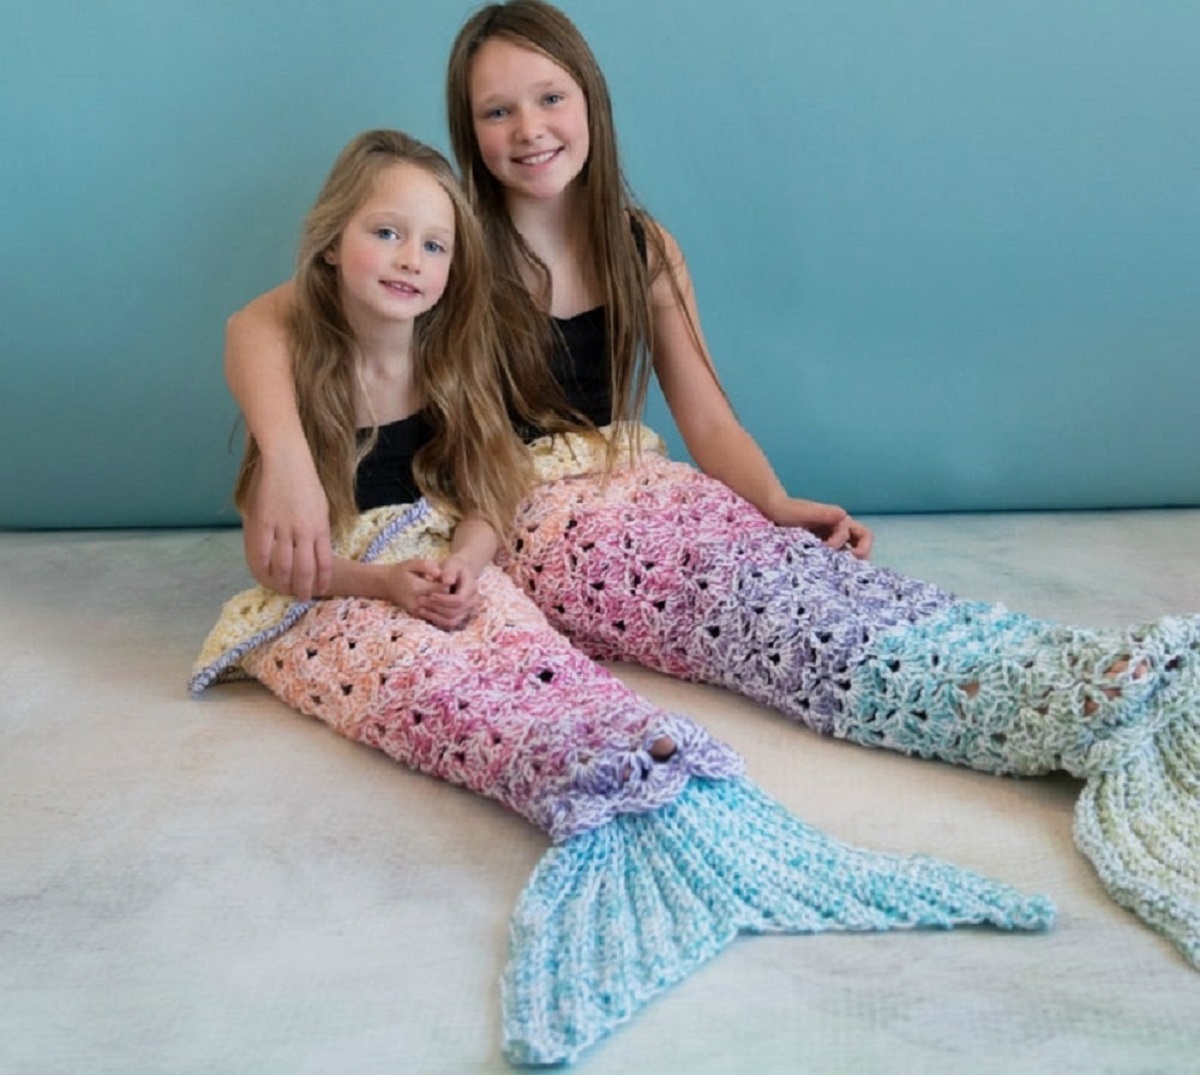  Two young girls sitting next to each other wearing multicolored pastel crochet mermaid tail blankets from their waists to their feet.